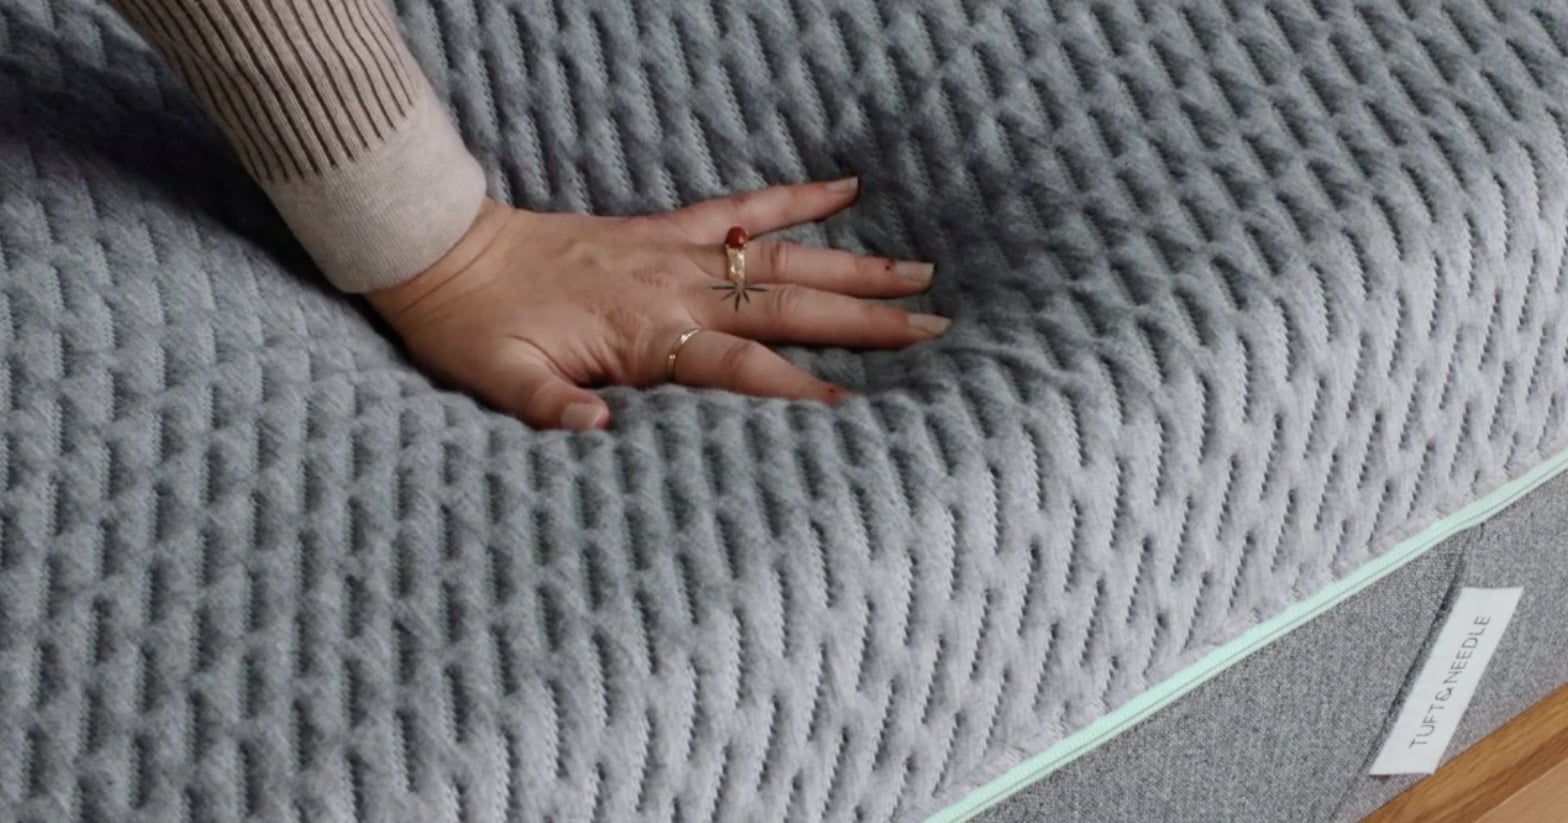 This Hybrid Mattress Has Changed My Sleep Quality For the Better — and It’s on Sale